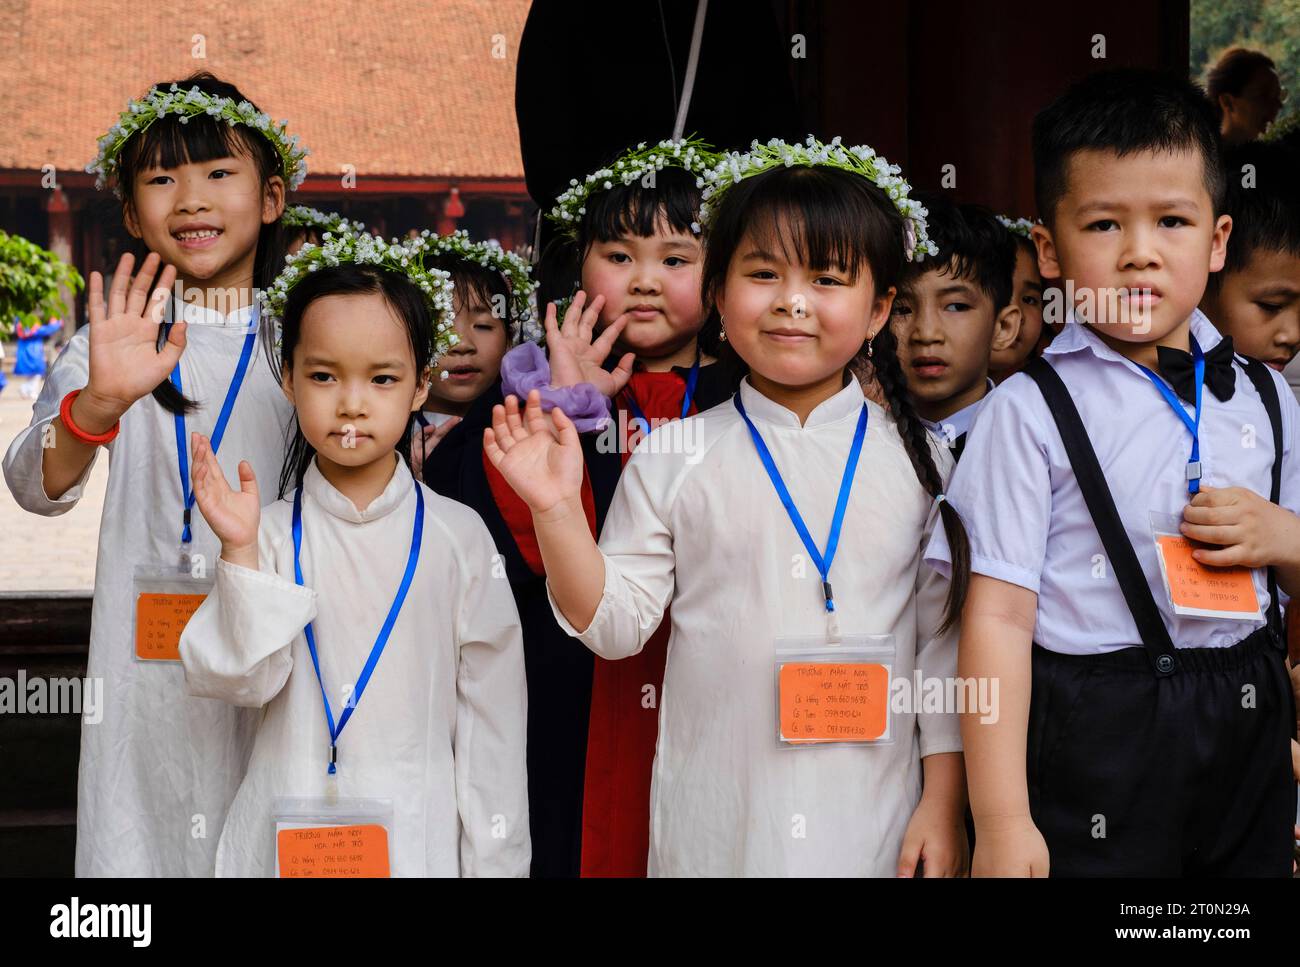 Hanoi, Vietnam. Temple of Literature, Van Mieu. Young Students Coming to Celebrate their Graduation from a Year of Studies. Stock Photo